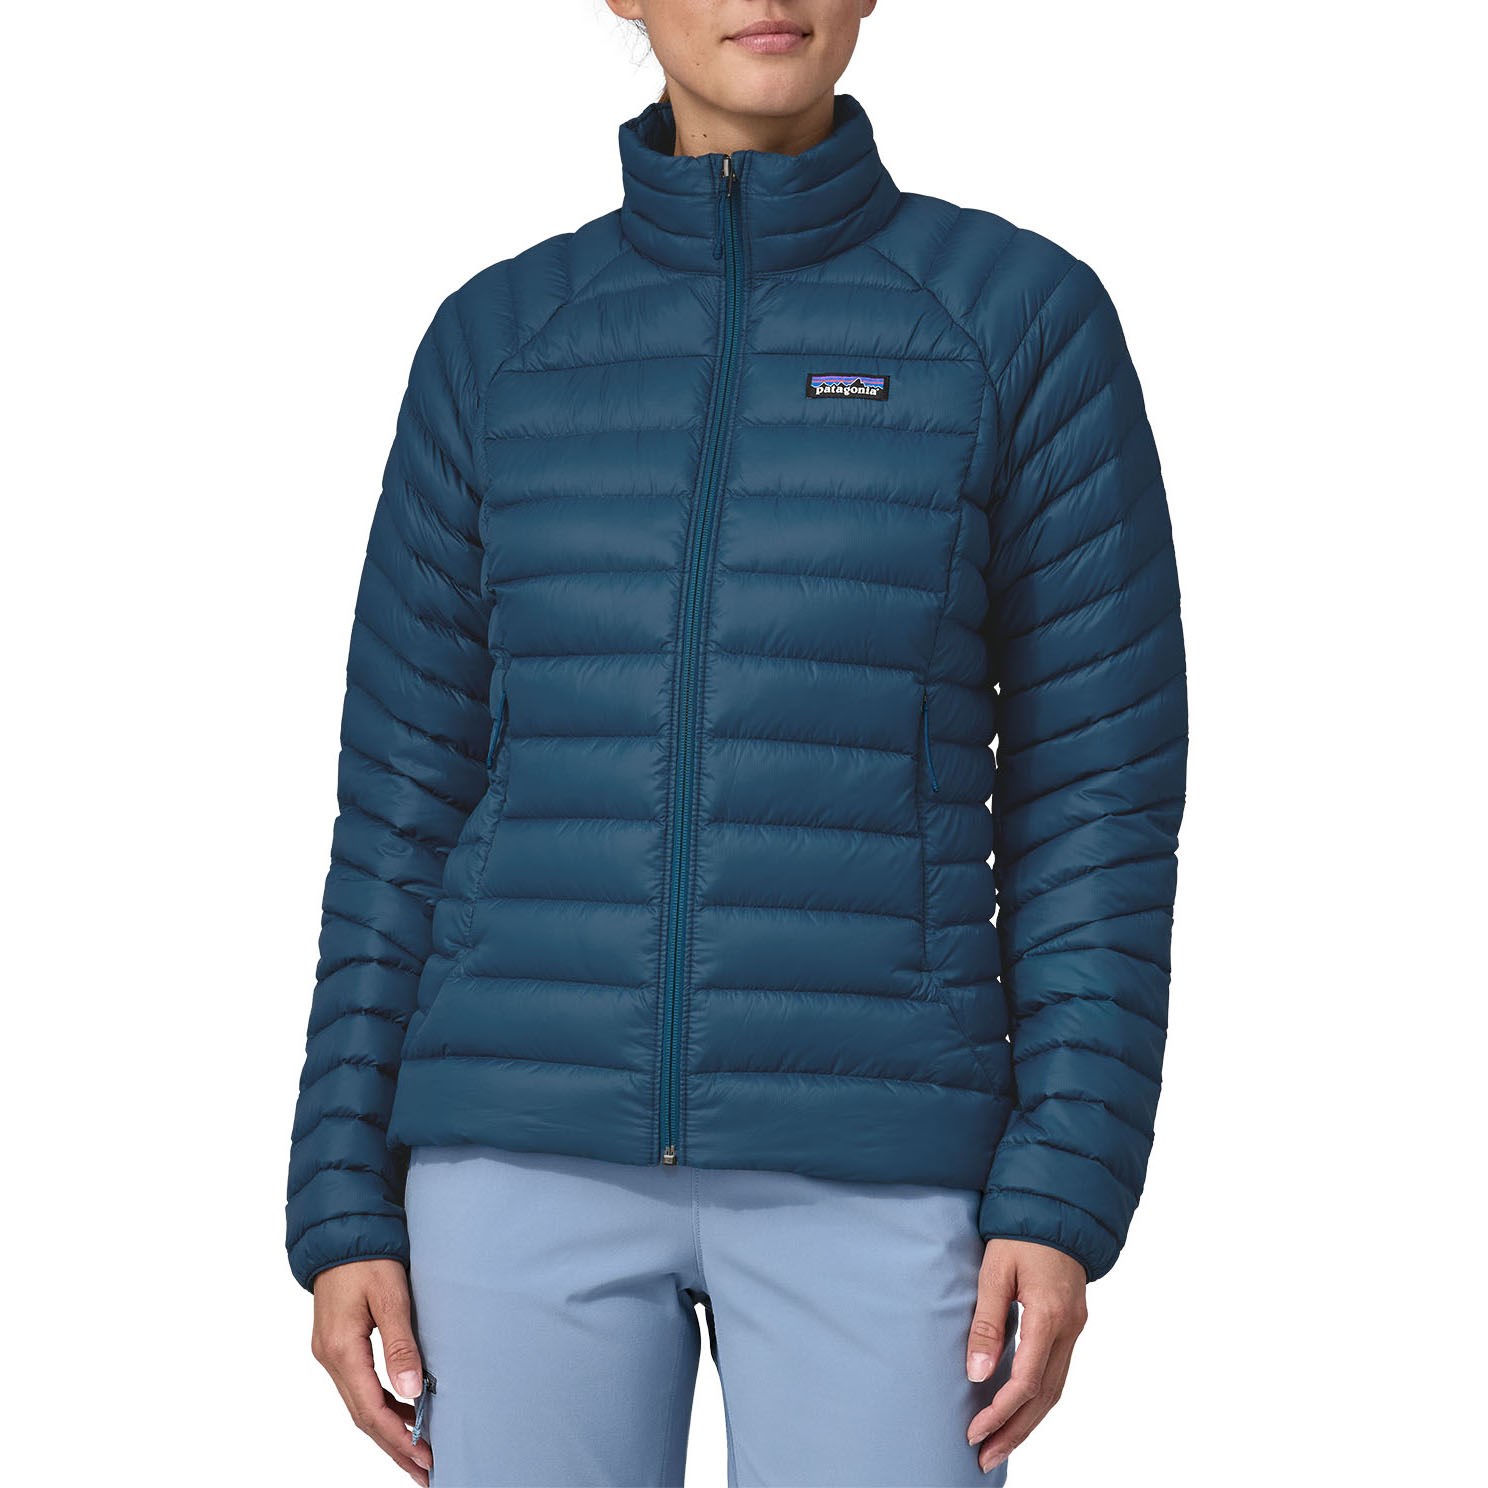 Patagonia Women Down Sweater Jacket - Classic Navy, Small 